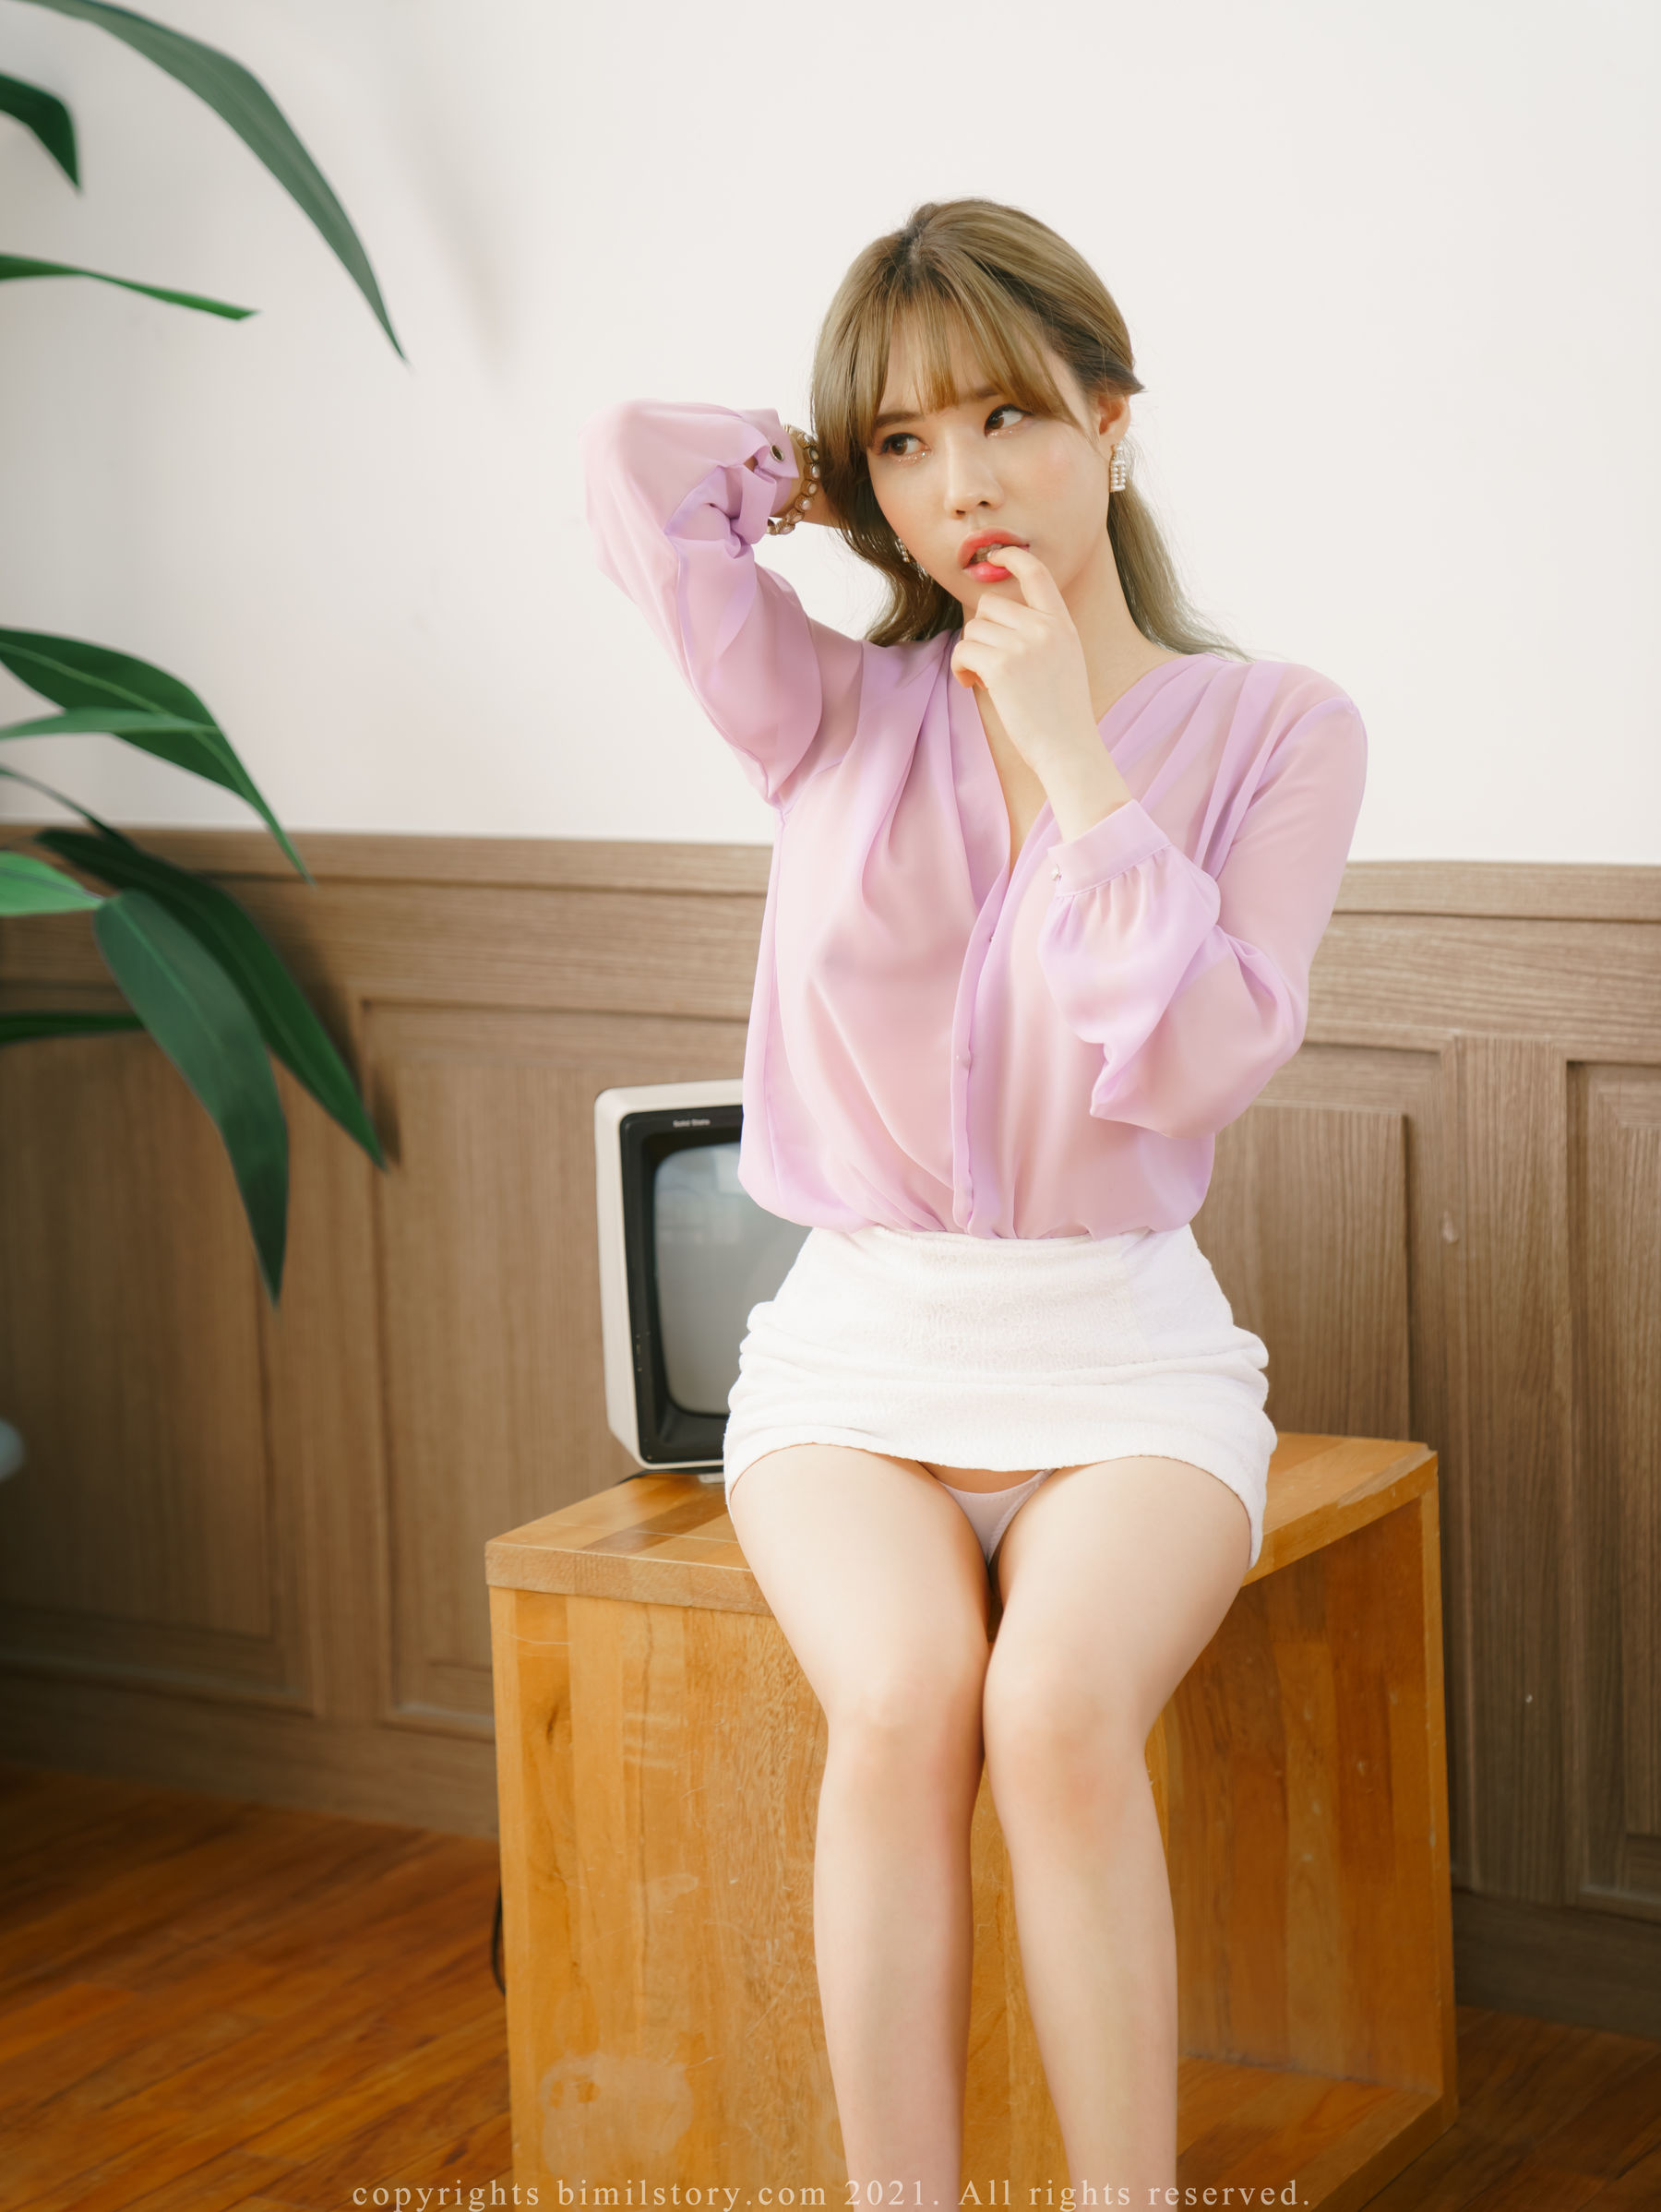 [Bimilstory] Eunha 2023.04.04 Vol.04 How to dress in case of F cup size woman/(88P)